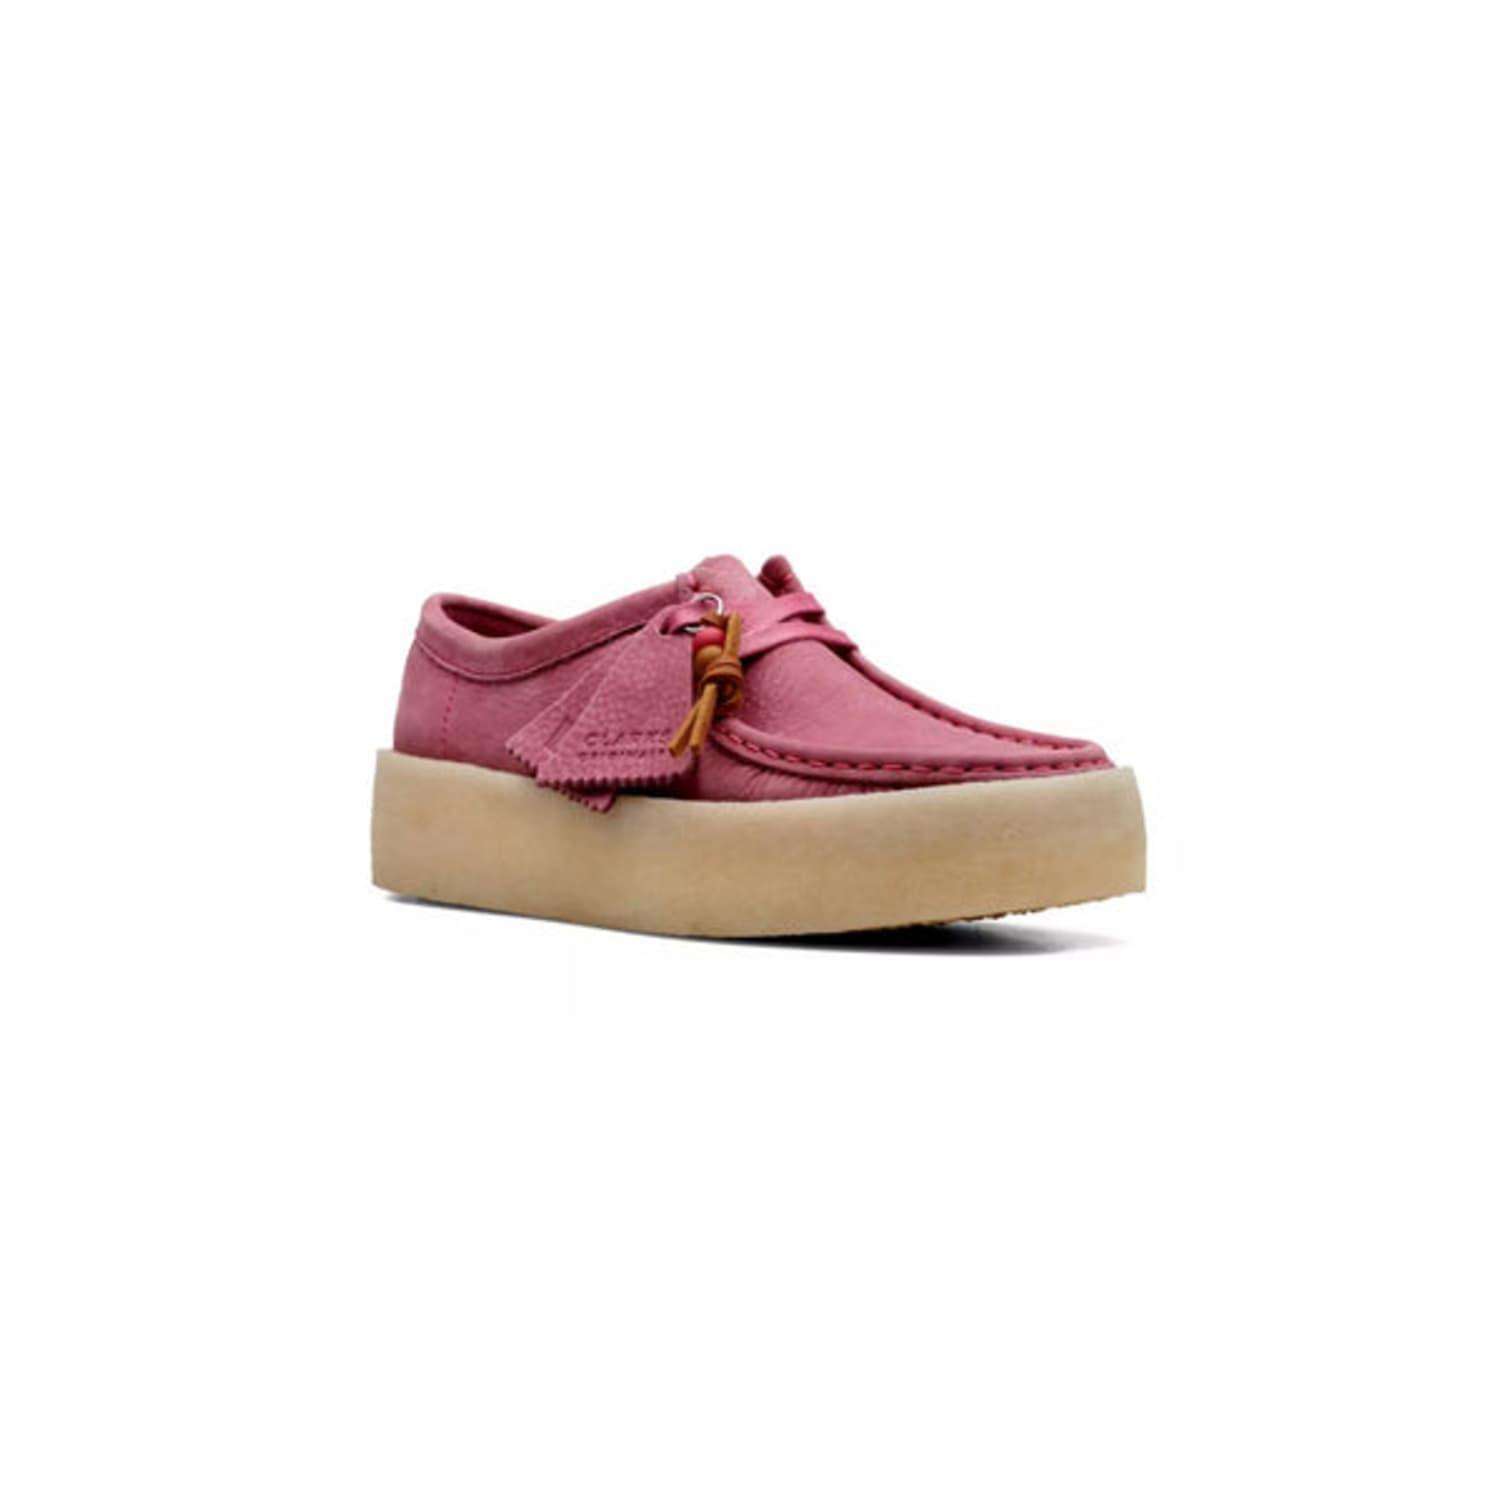 Clarks Shoes Wallabee Cup Pink Nubuck | Lyst